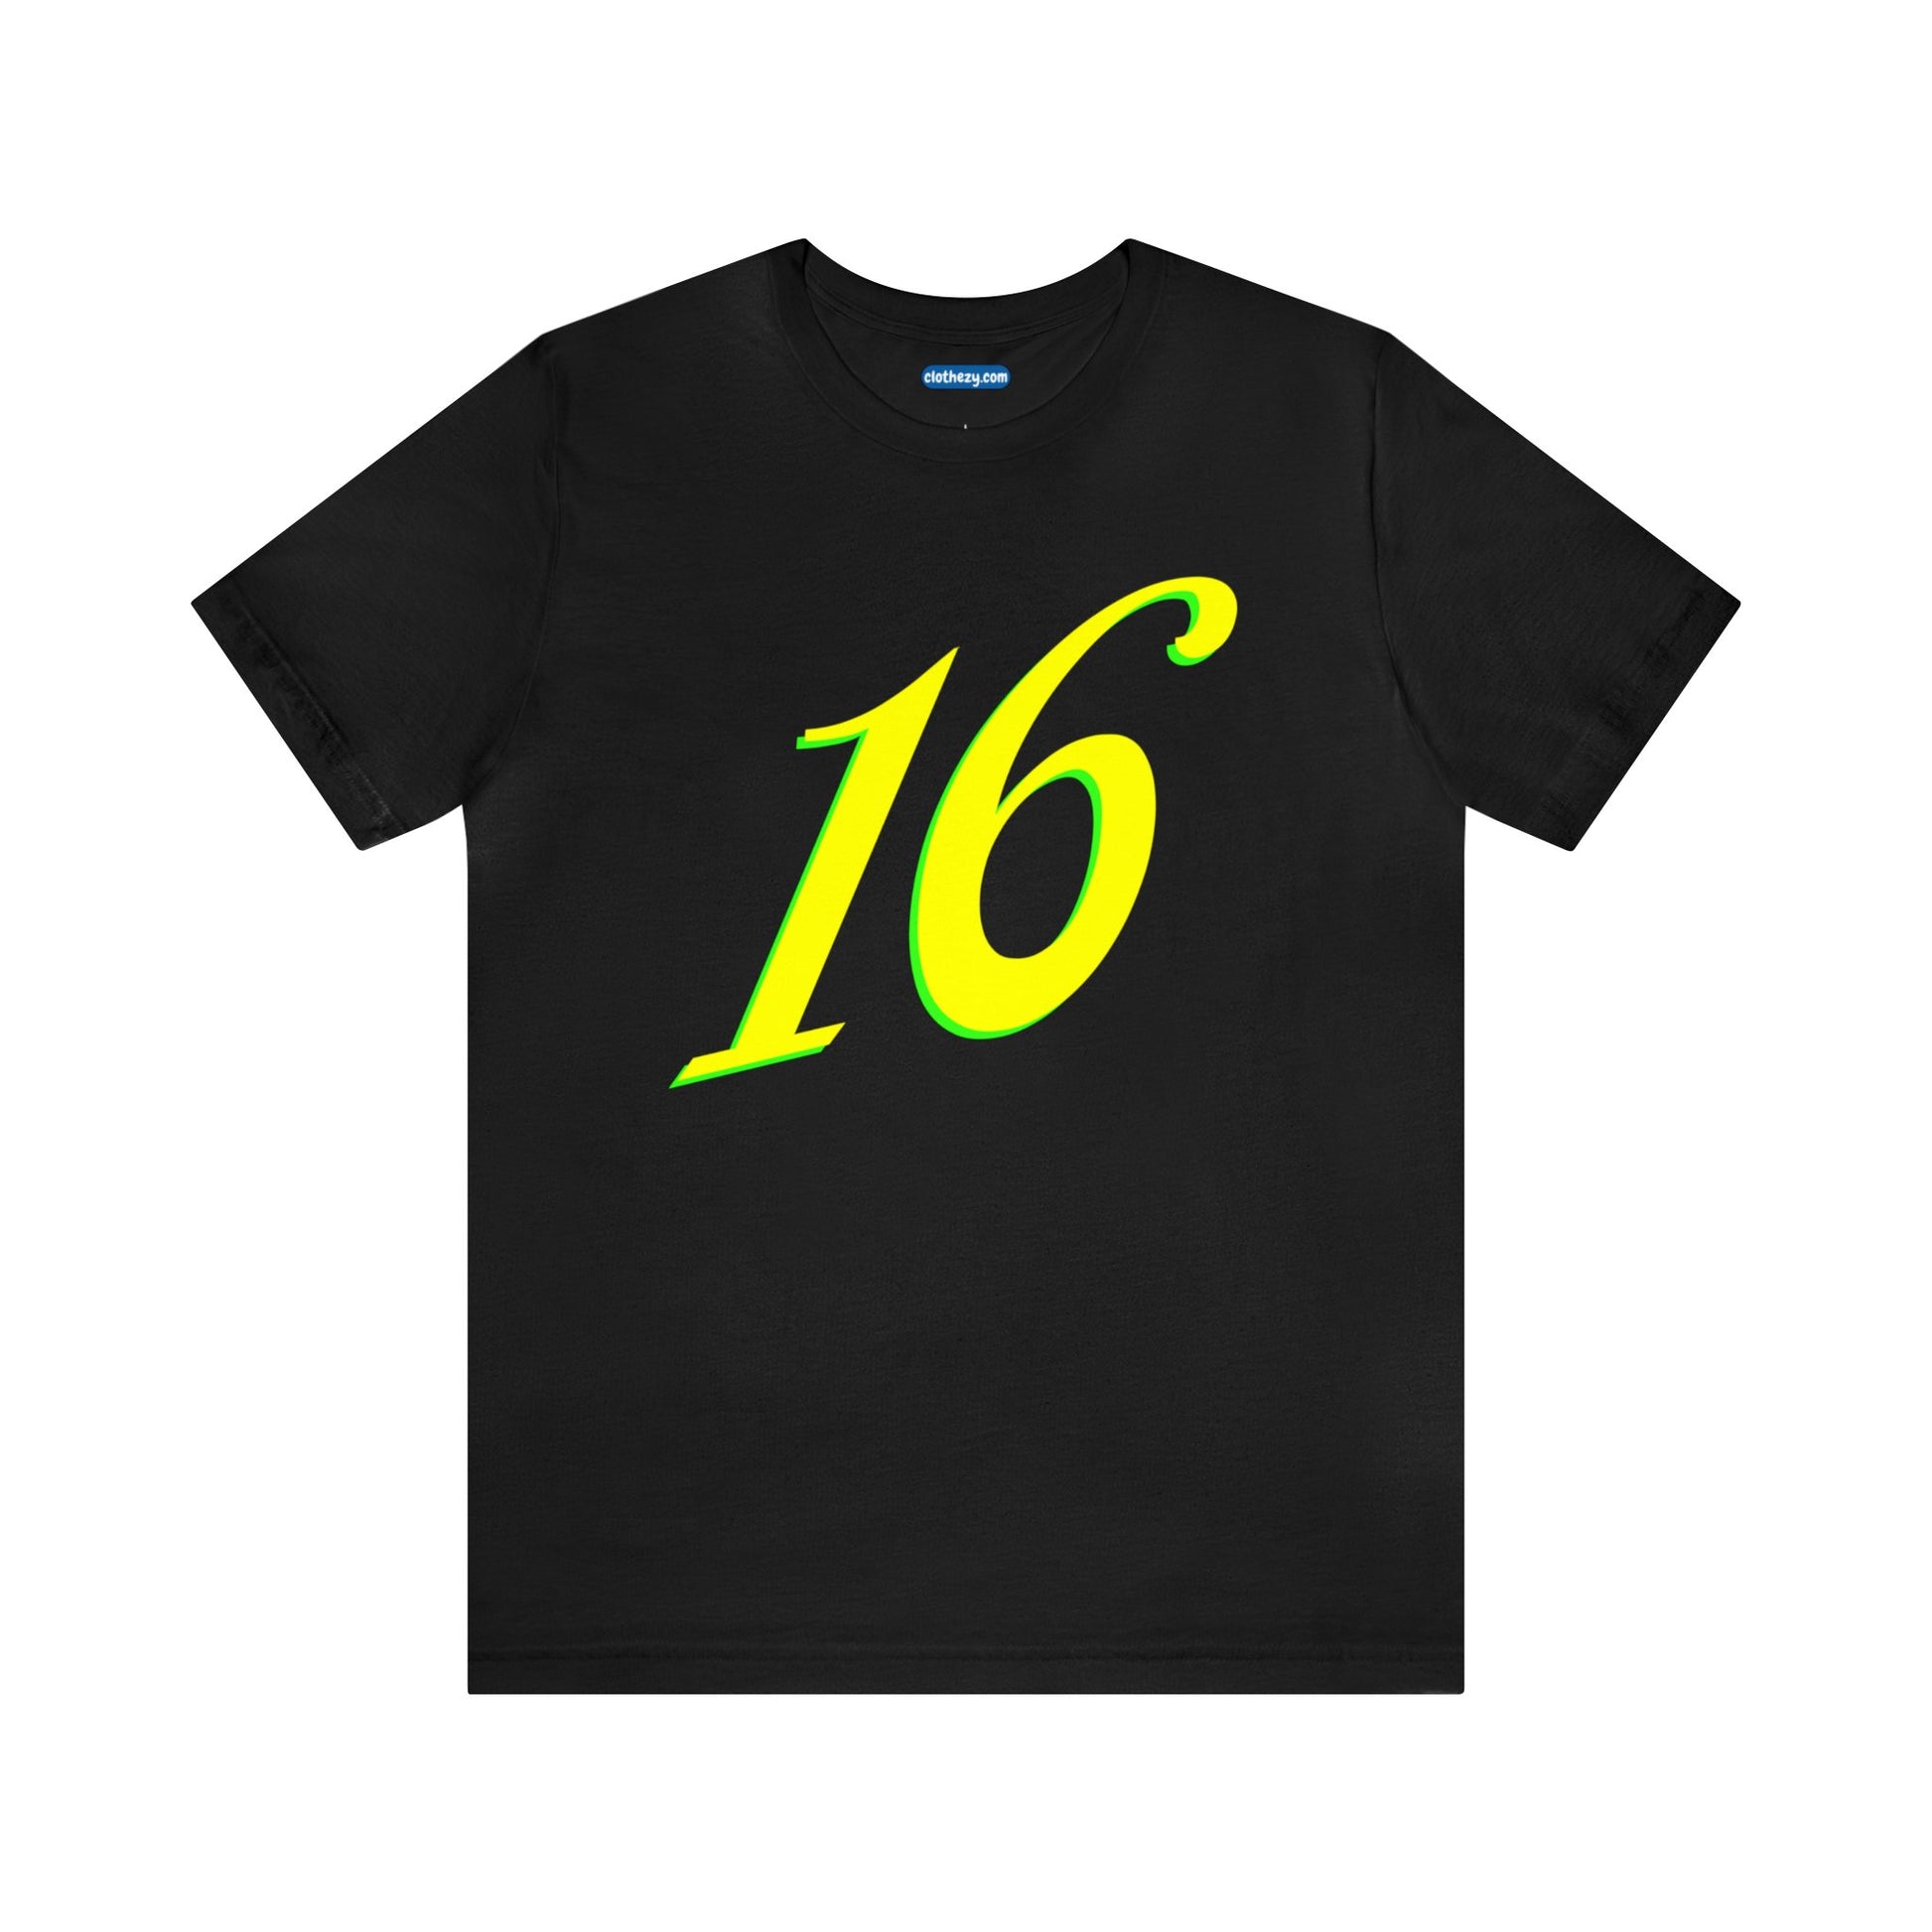 Number 16 Design - Soft Cotton Tee for birthdays and celebrations, Gift for friends and family, Multiple Options by clothezy.com in Dark Grey Heather Size Small - Buy Now